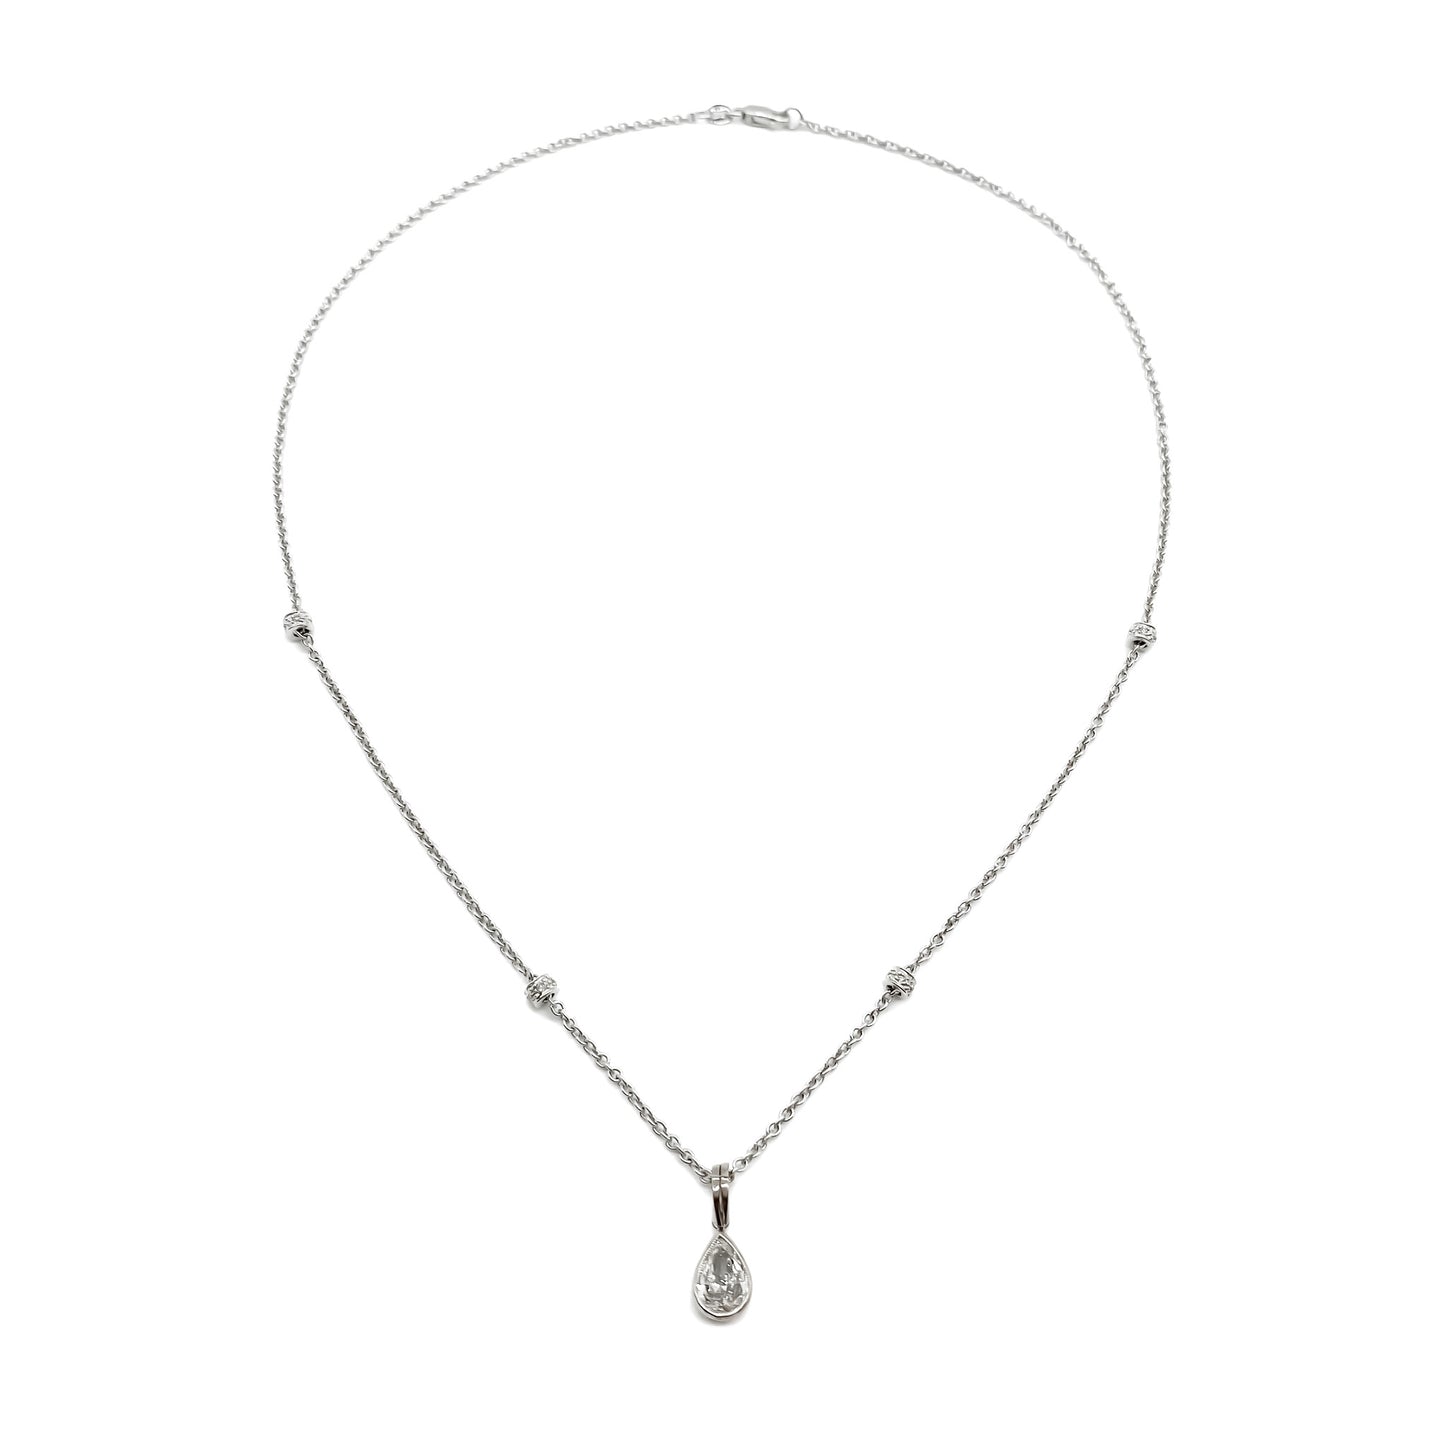 Stylish 18ct white gold necklace set with a 0.85ct pear-shaped centre diamond drop and four beads encrusted with small diamonds.